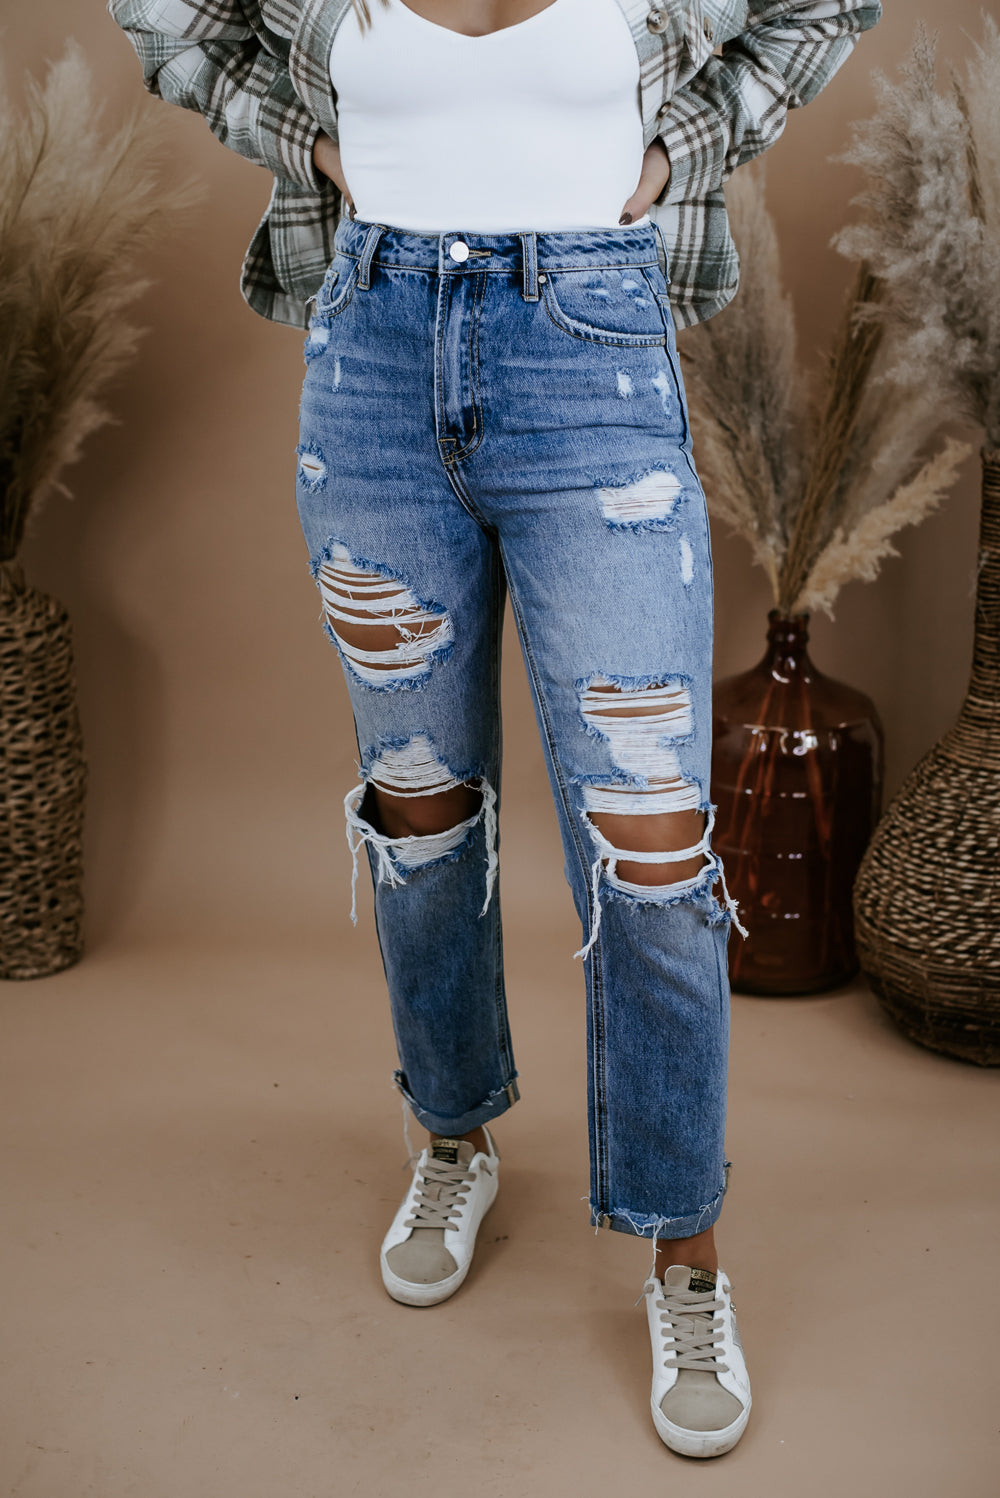 Extreme ripped jeans are the cracking new fashion trend that